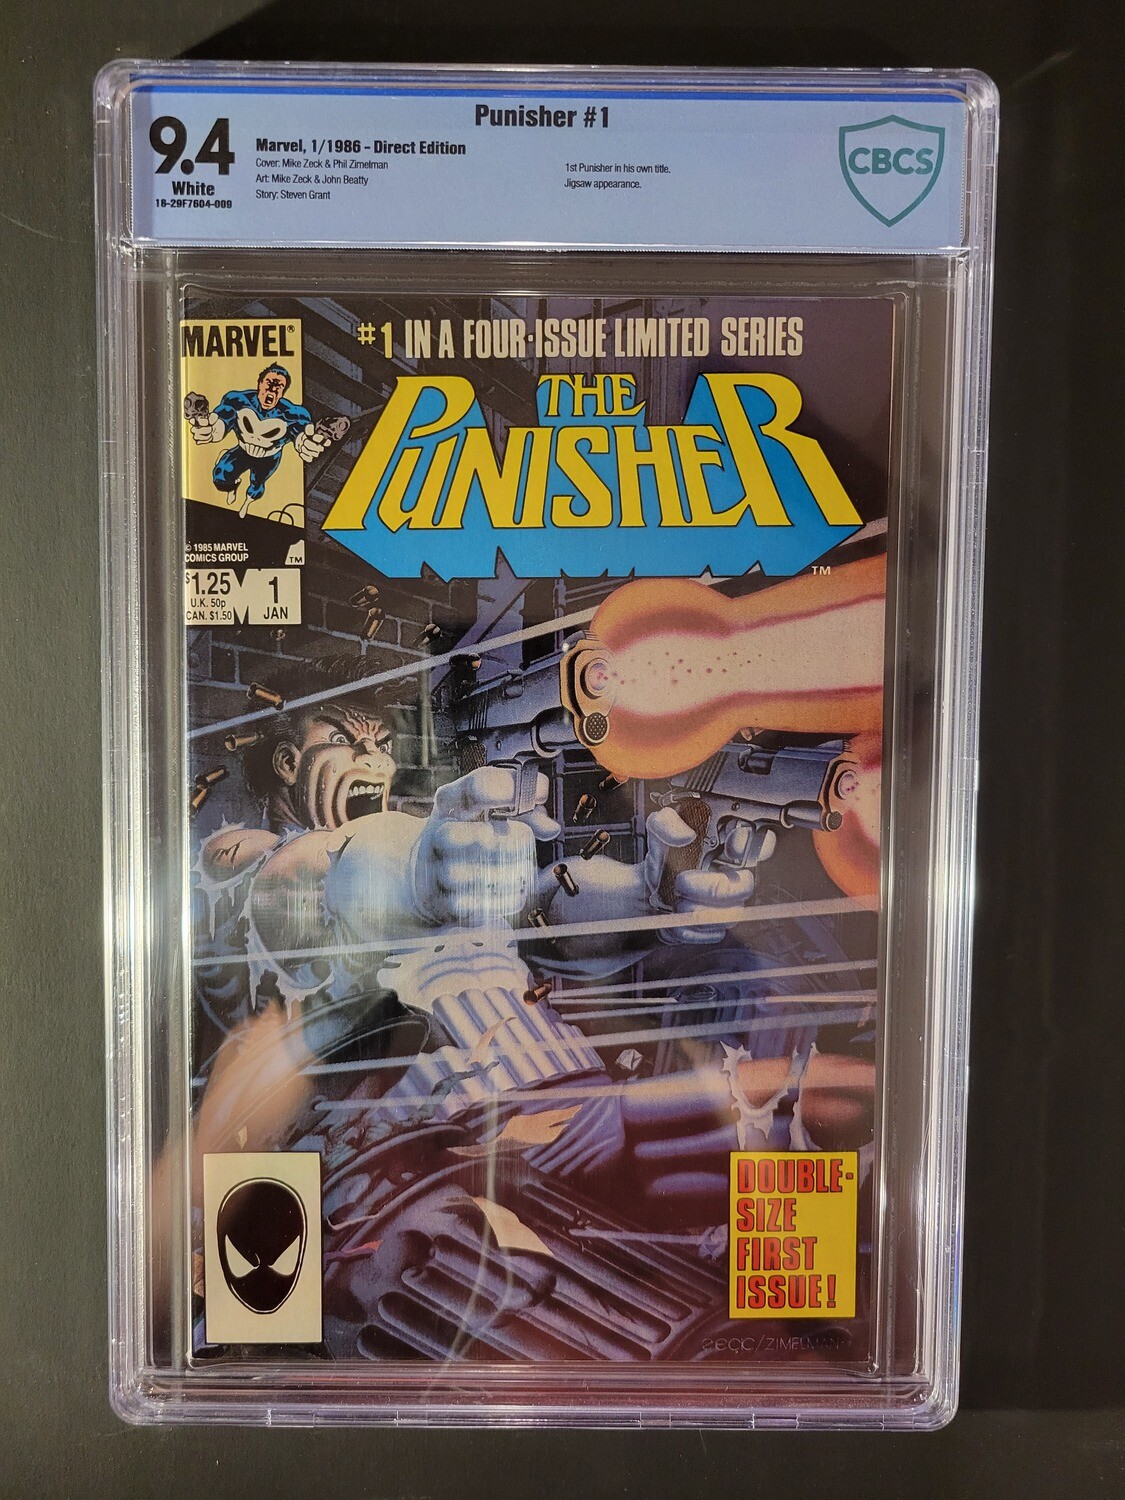 Punisher #1 CBCS 9.4 1st appearance of Punisher in his own title